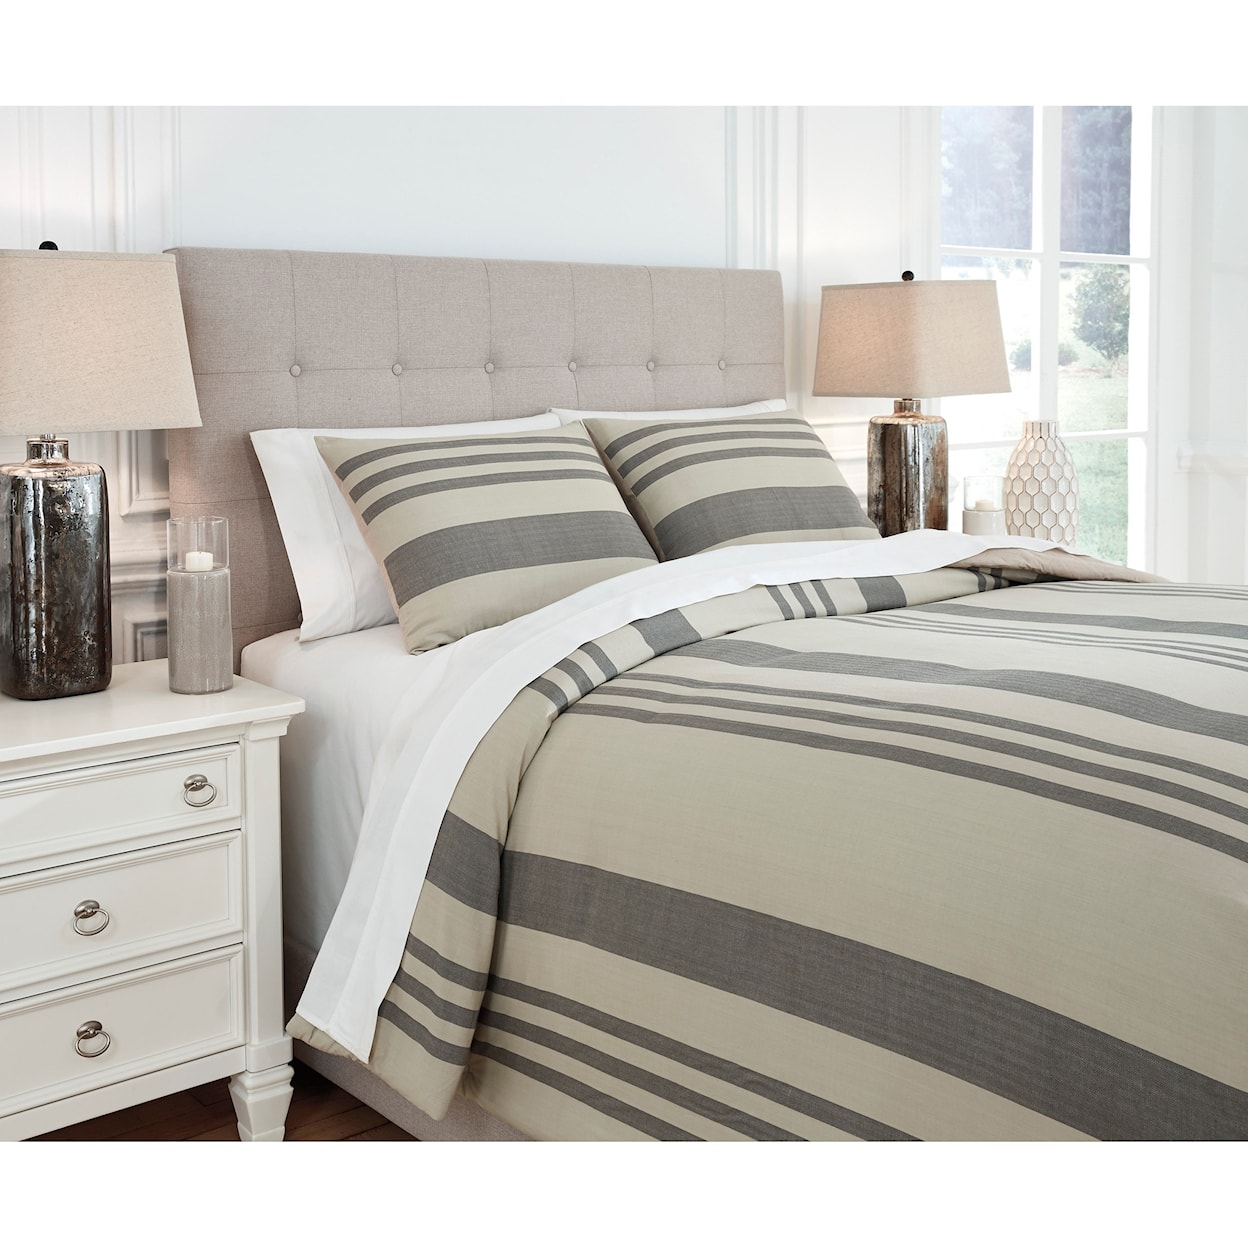 Signature Design by Ashley Bedding Sets King Schukei Natural/Charcoal Comforter Set